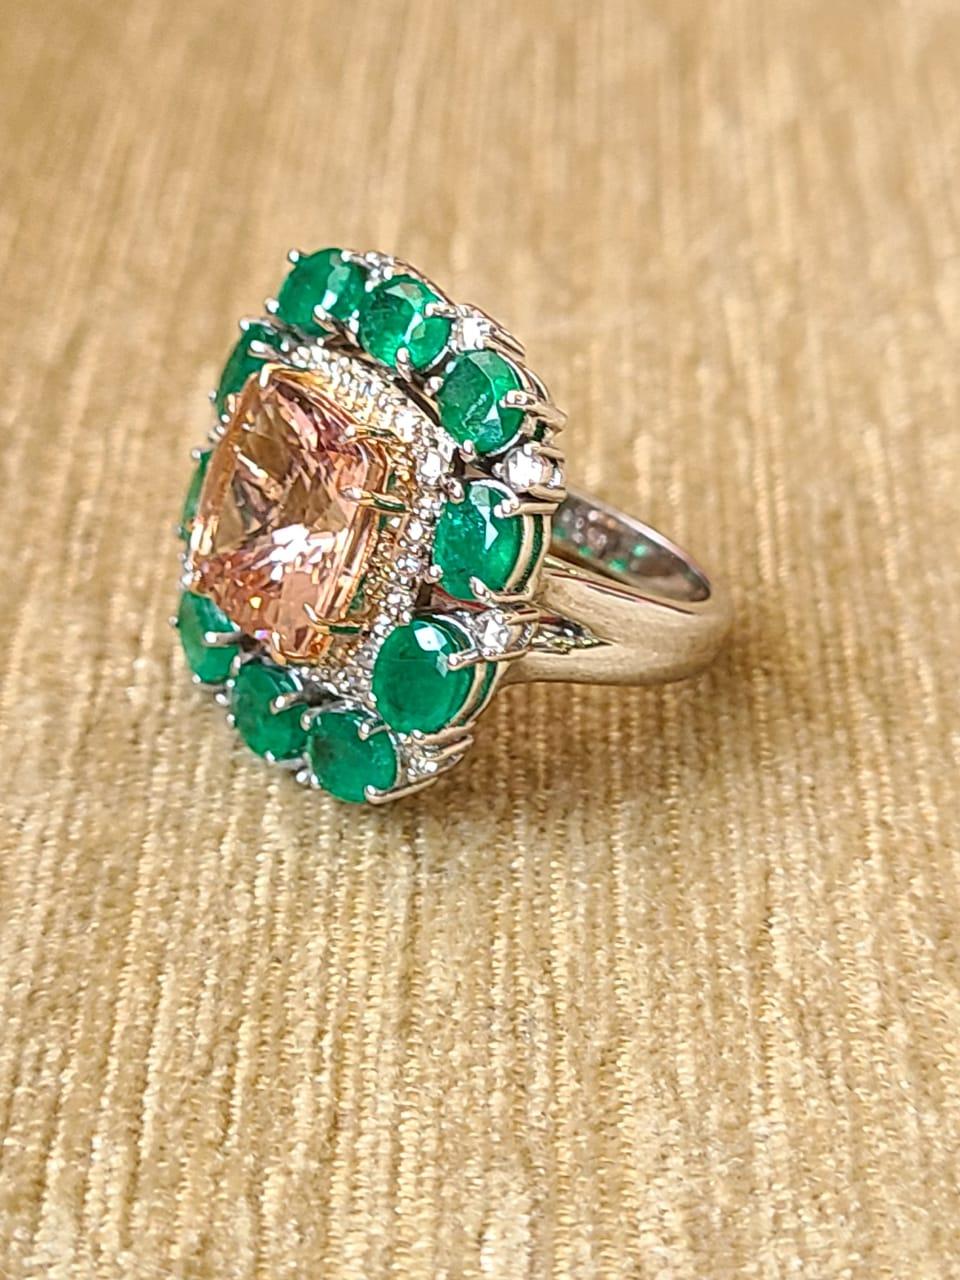 A very beautiful & one of a kind, Morganite and Emerald Cocktail/ Engagement Ring set in 18K Gold & Diamonds. The weight of the square Morganite is 4.93 carats. The weight of the Emeralds is 3.69 carats. The Emeralds are completely natural, without